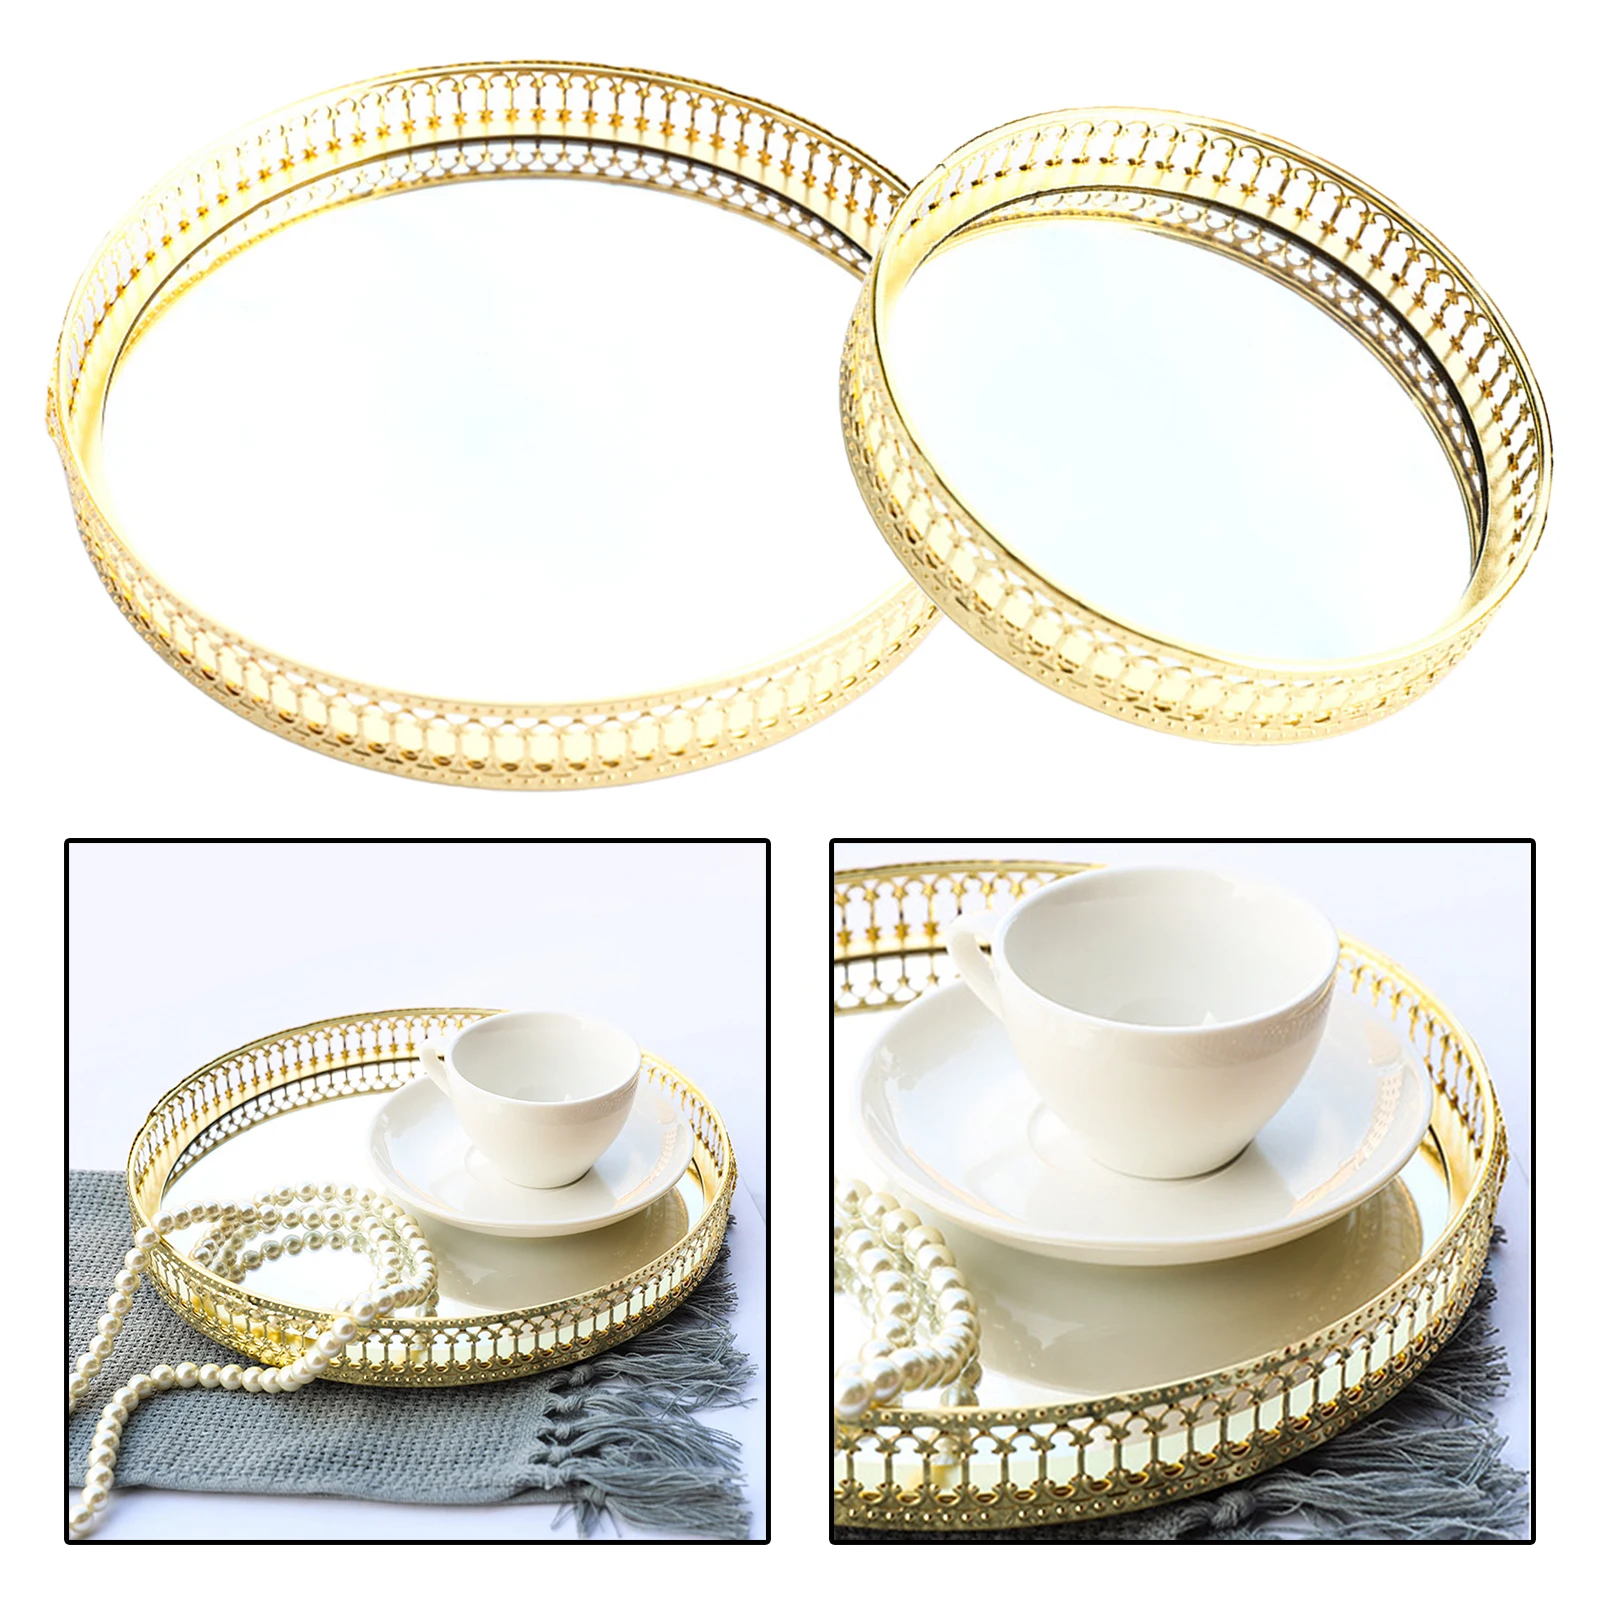 Vintage Mirror Glass Metal Storage Tray Gold Round Fruit Plate Desktop Small Items Jewelry Display Tray Plate